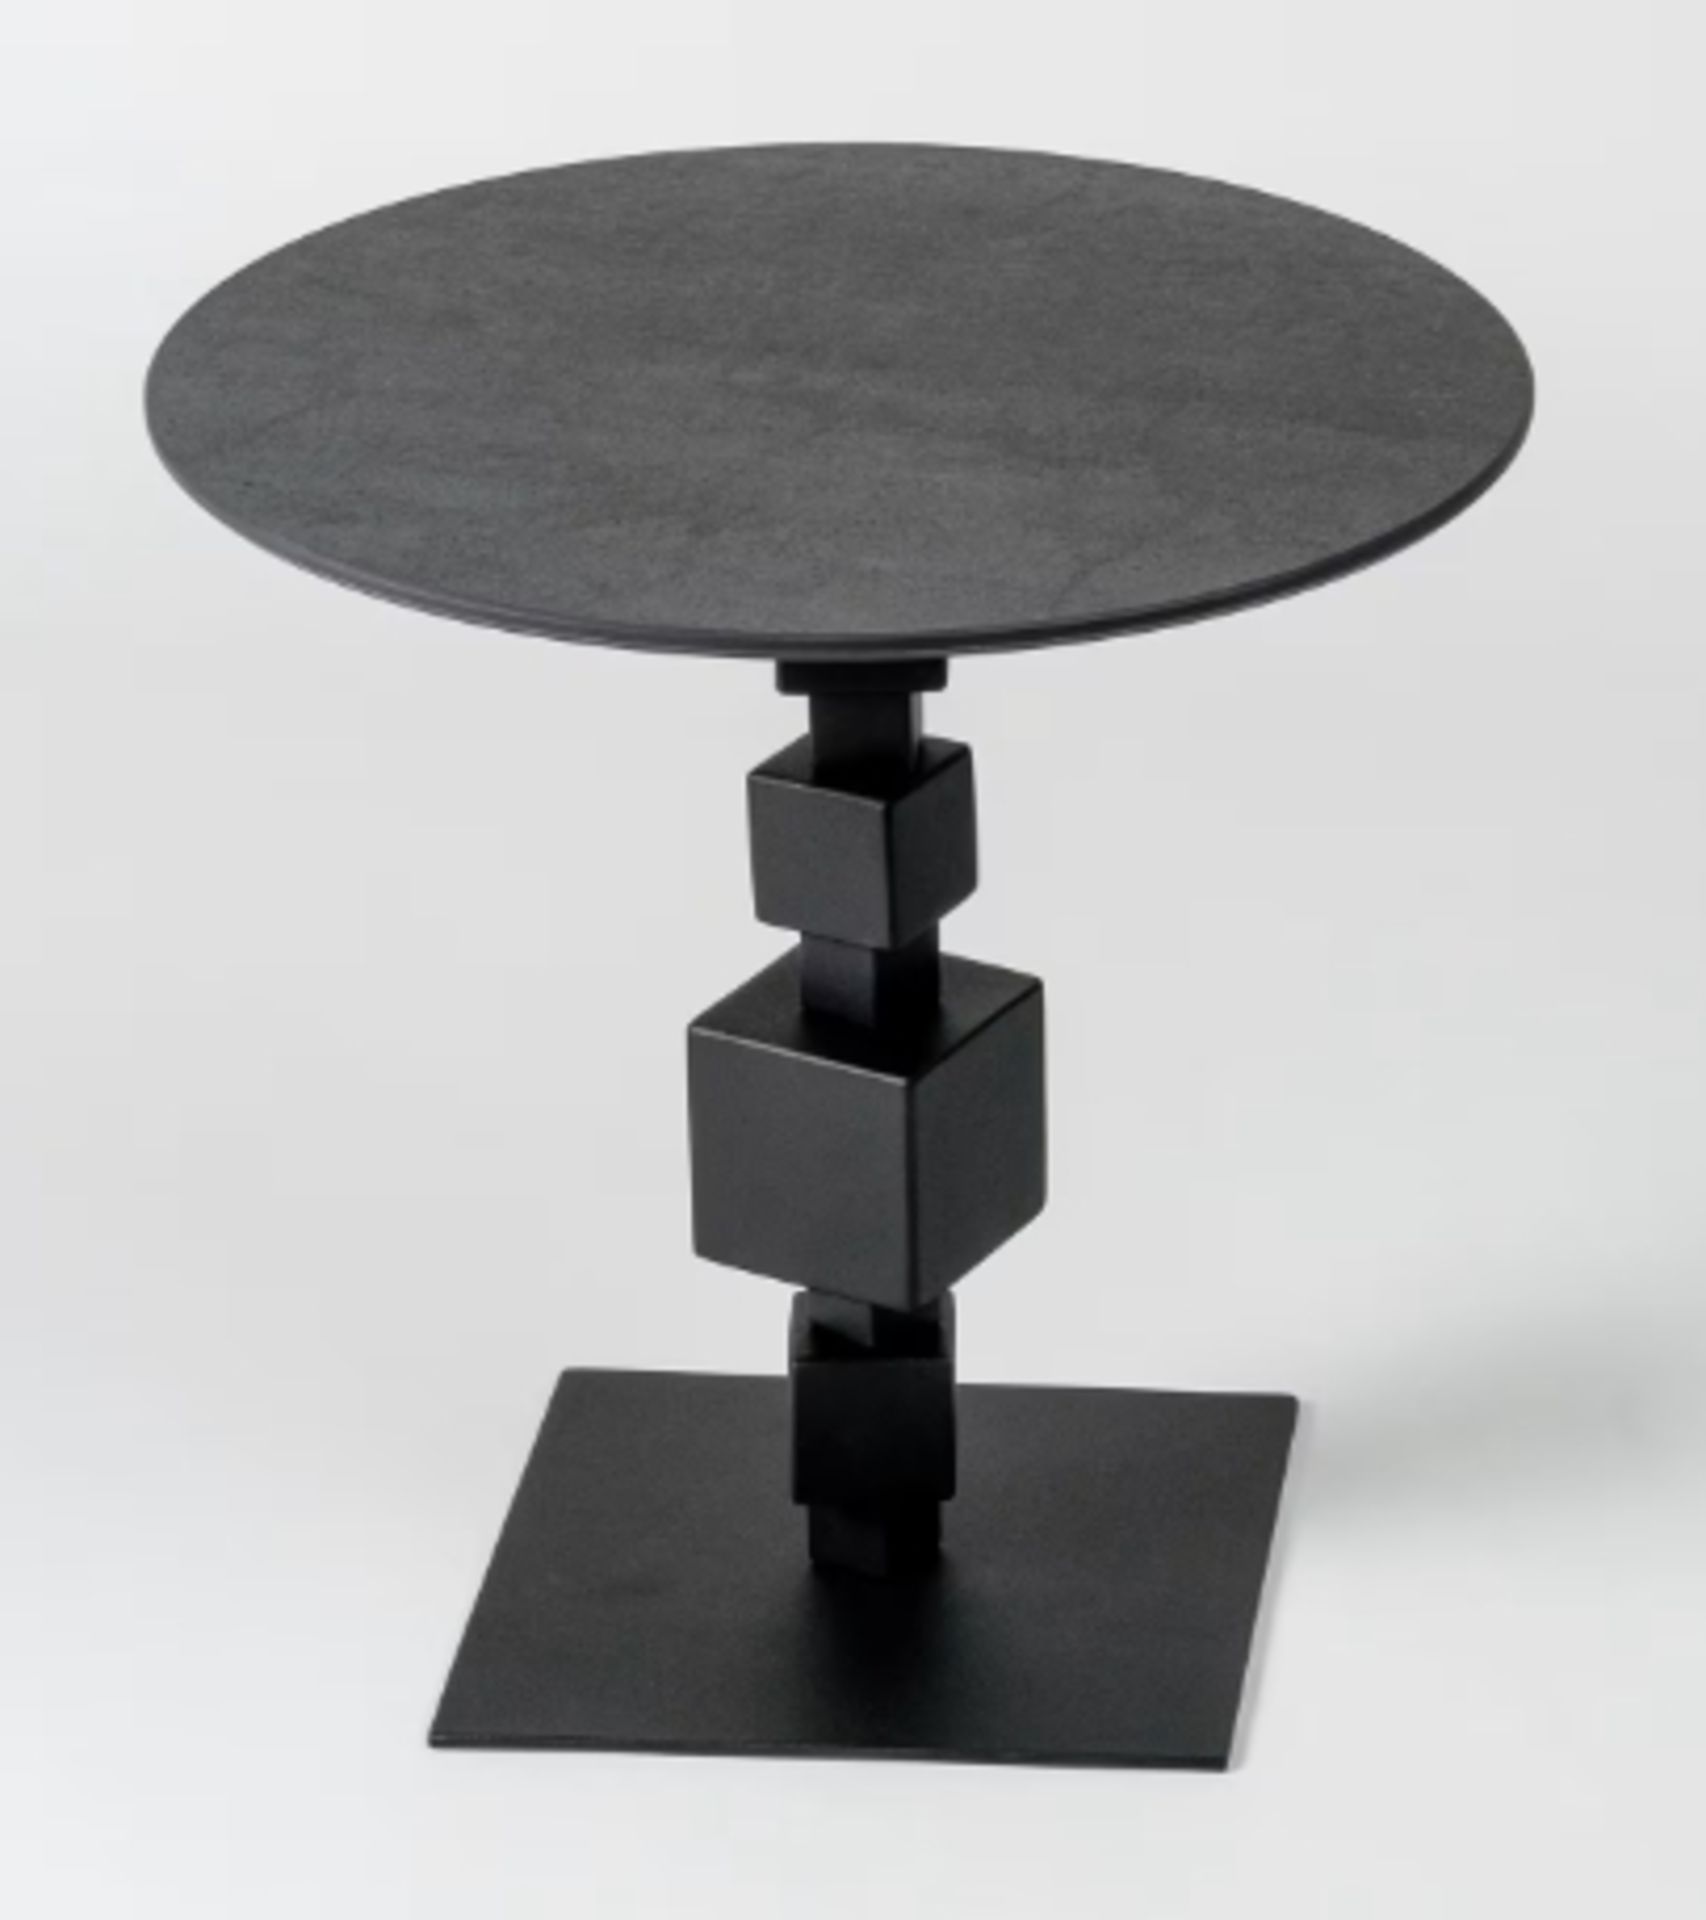 1 x NOLITA Occasional Side Table with a Cubed Metal Base, Bronzed Finish and Industrial - Image 5 of 9